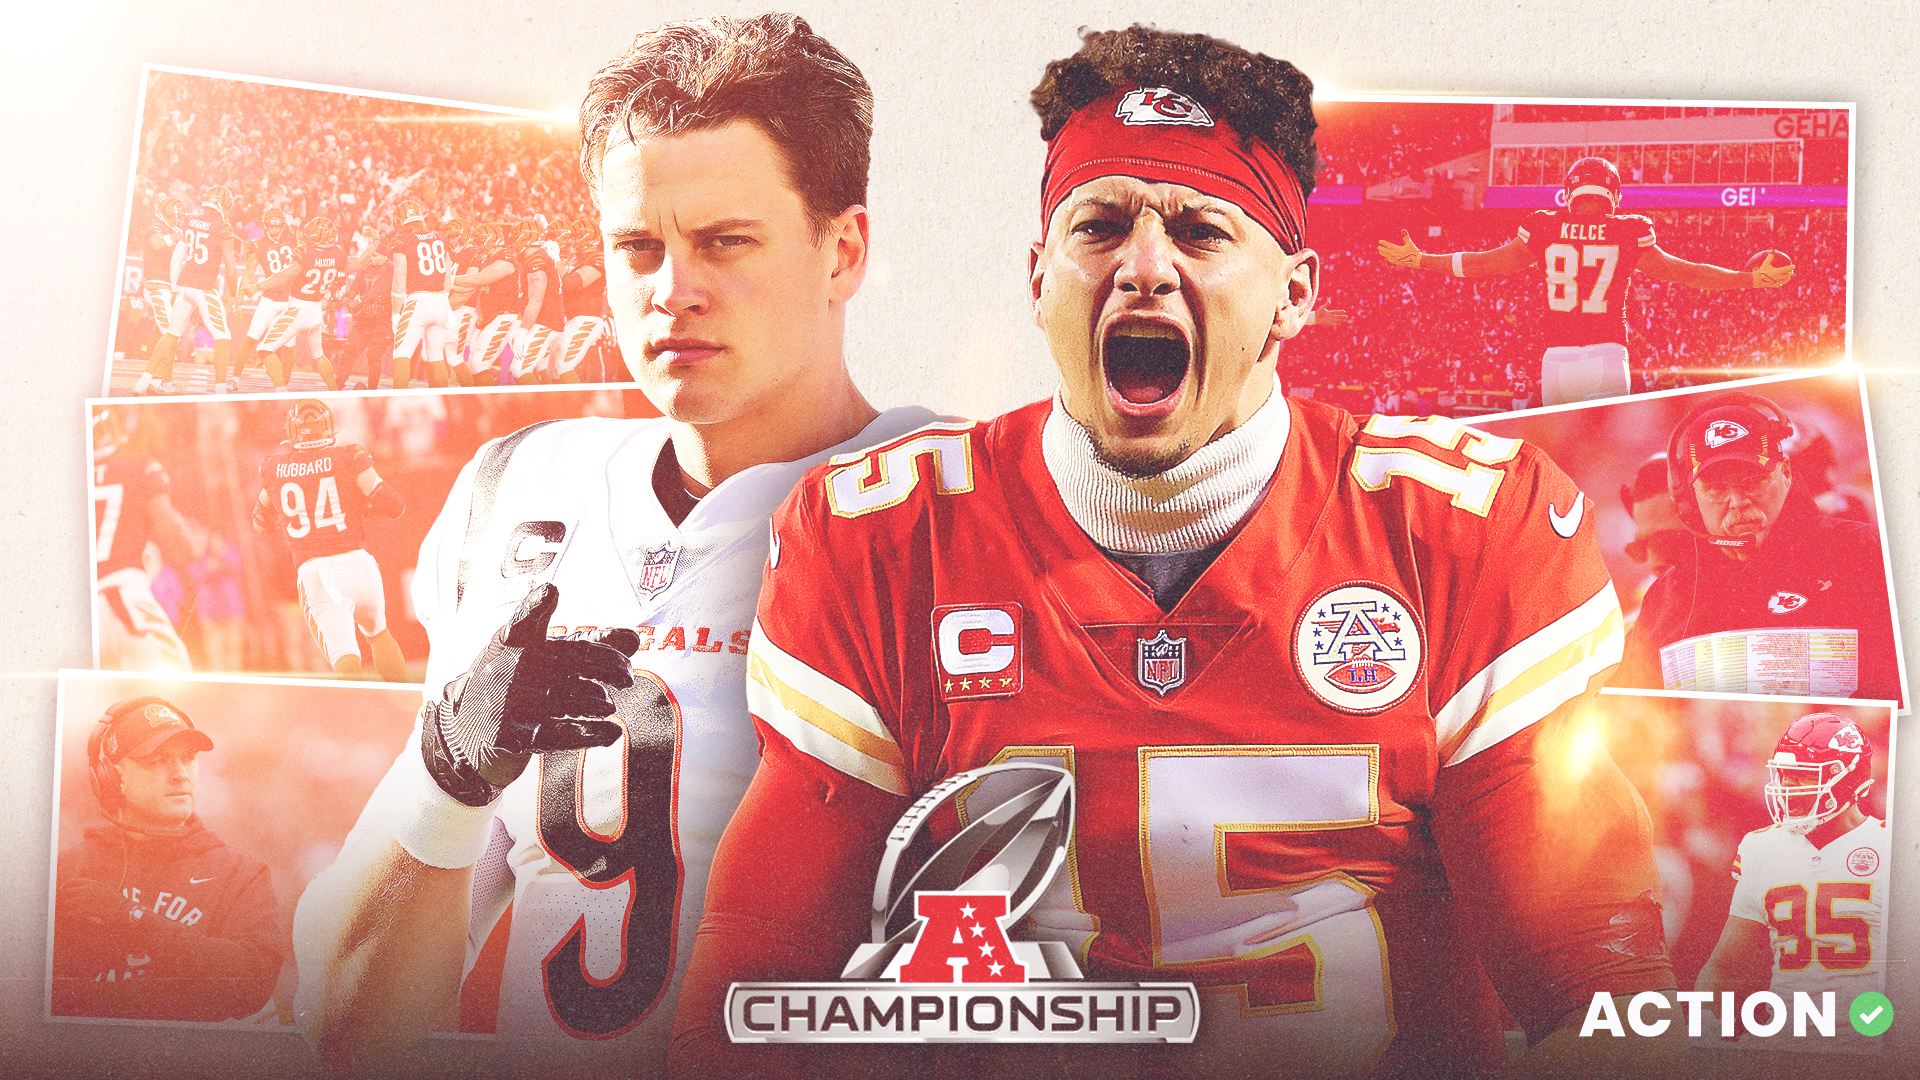 Bengals vs Chiefs Picks, Odds: AFC Championship Expert Predictions article feature image